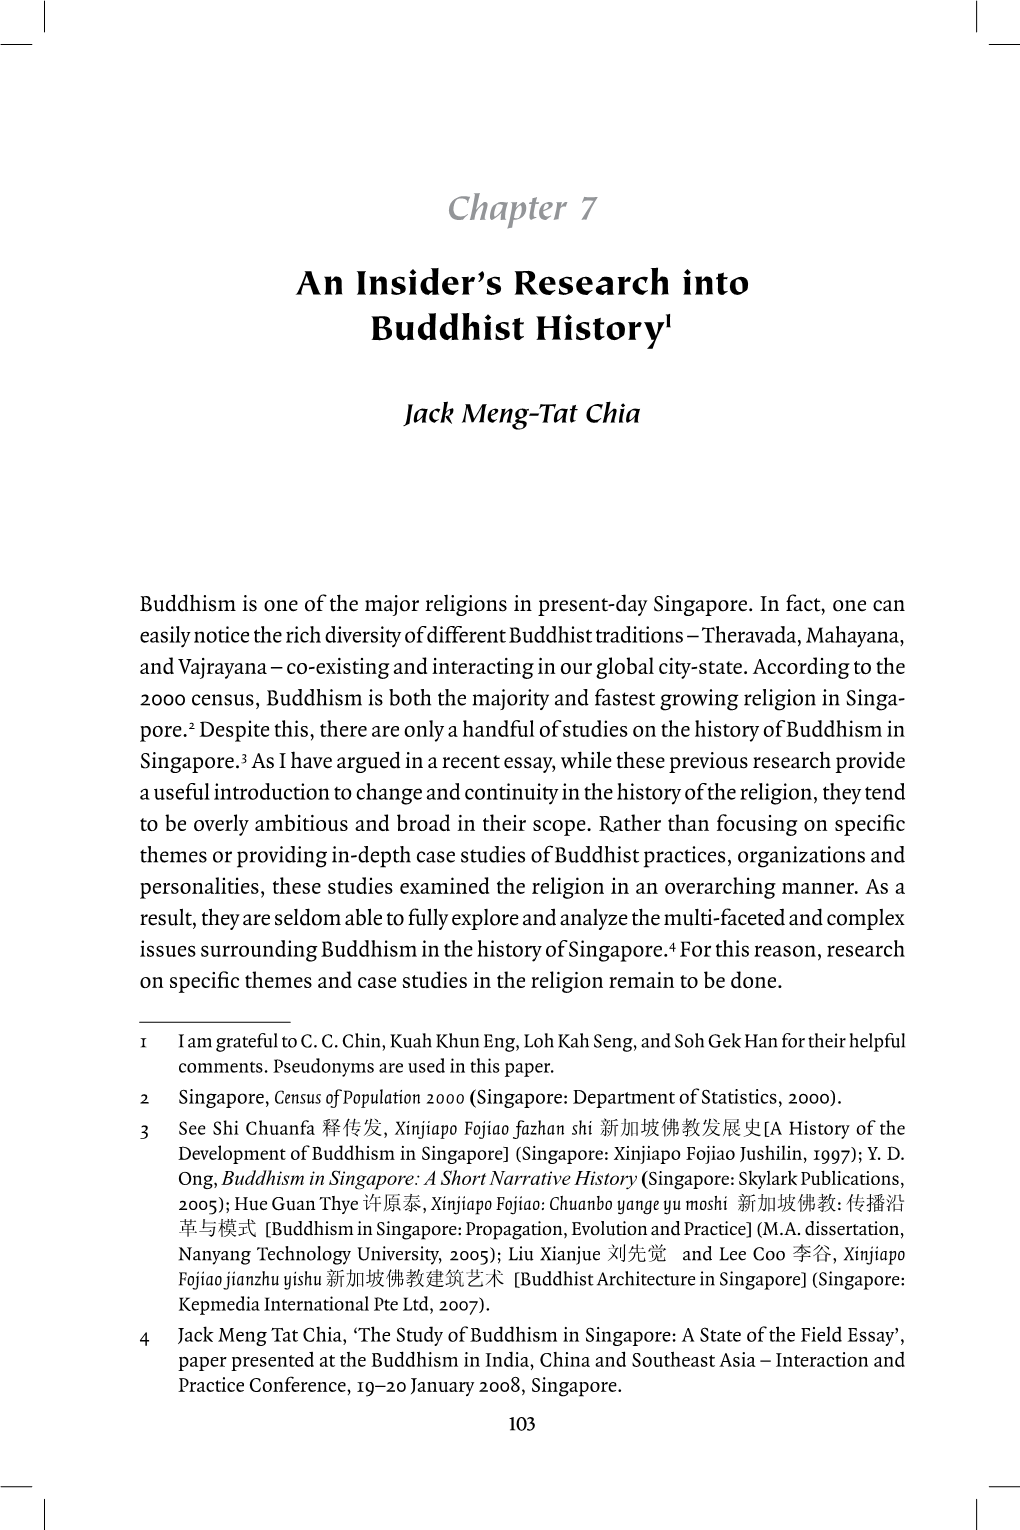 Chapter 7 an Insider's Research Into Buddhist History1